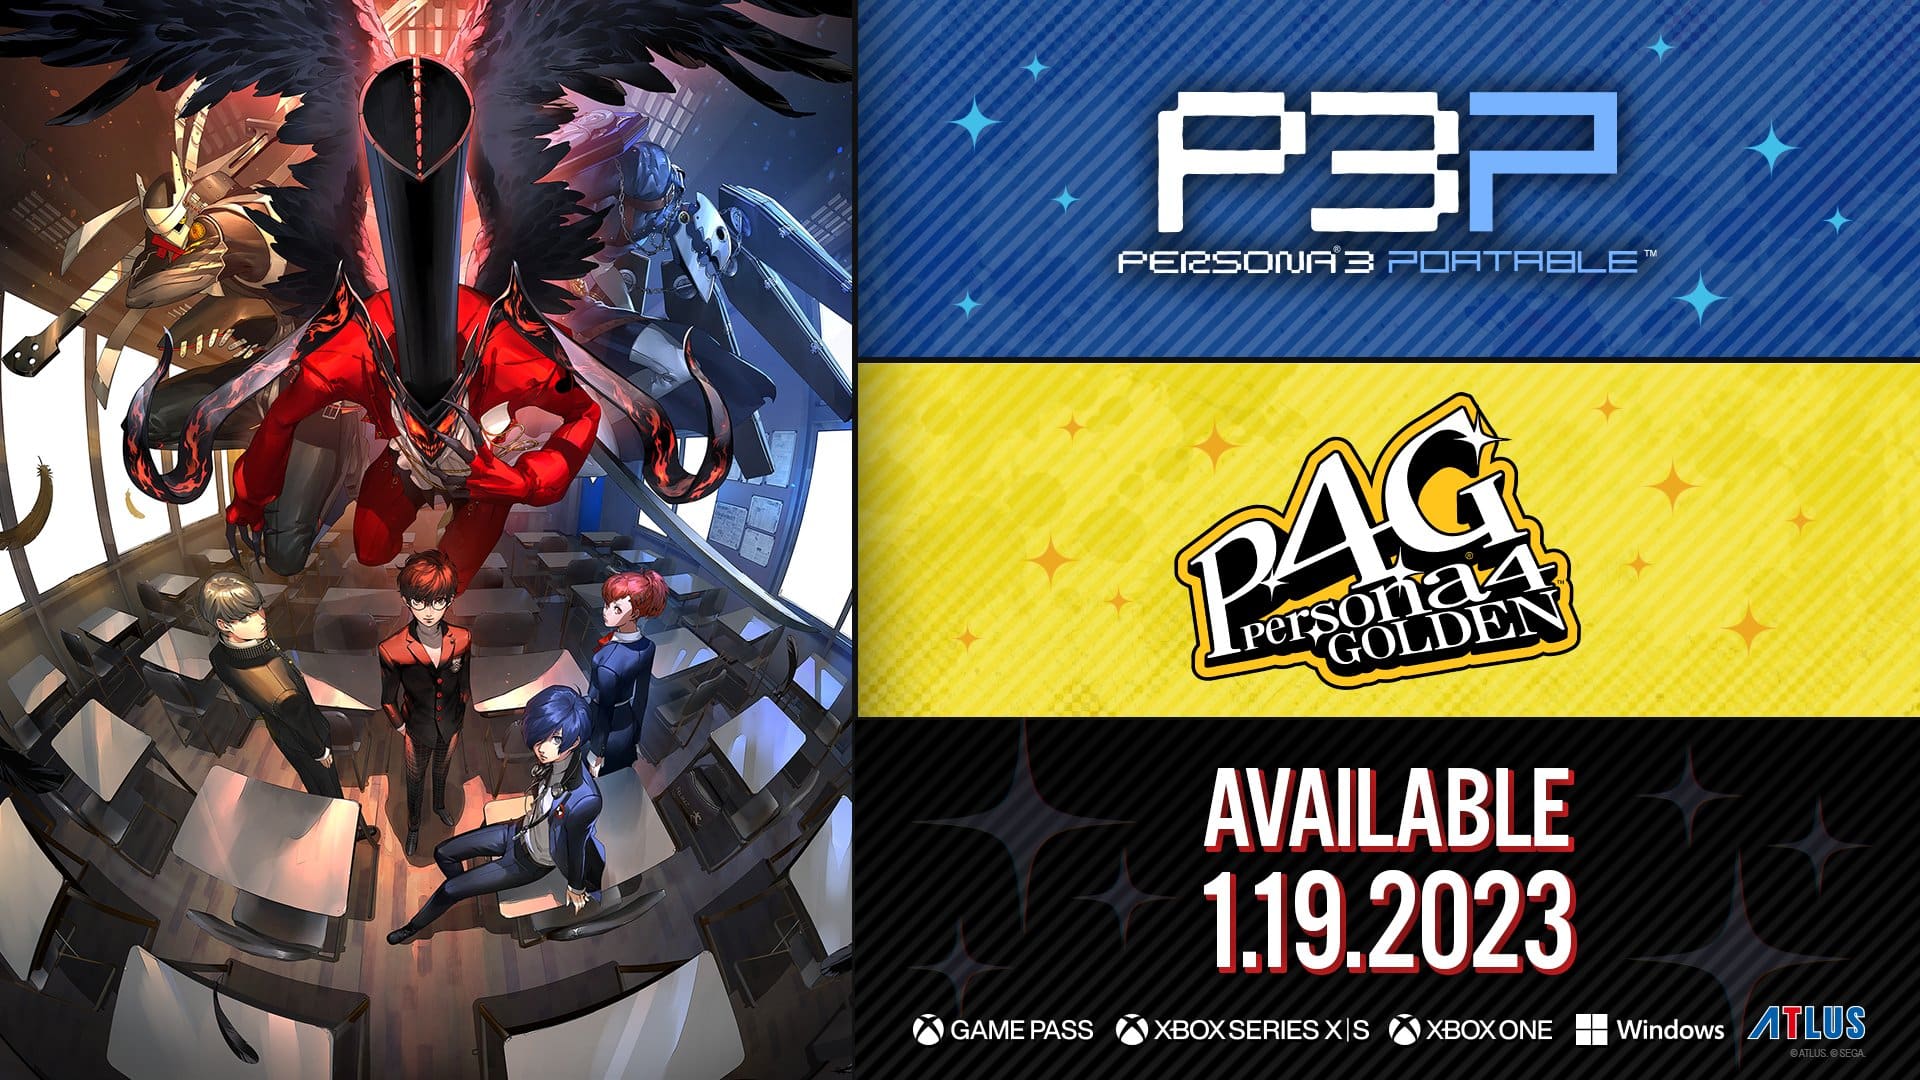 Persona 3 Portable and Persona 4 Golden will be released on January 19, 2023